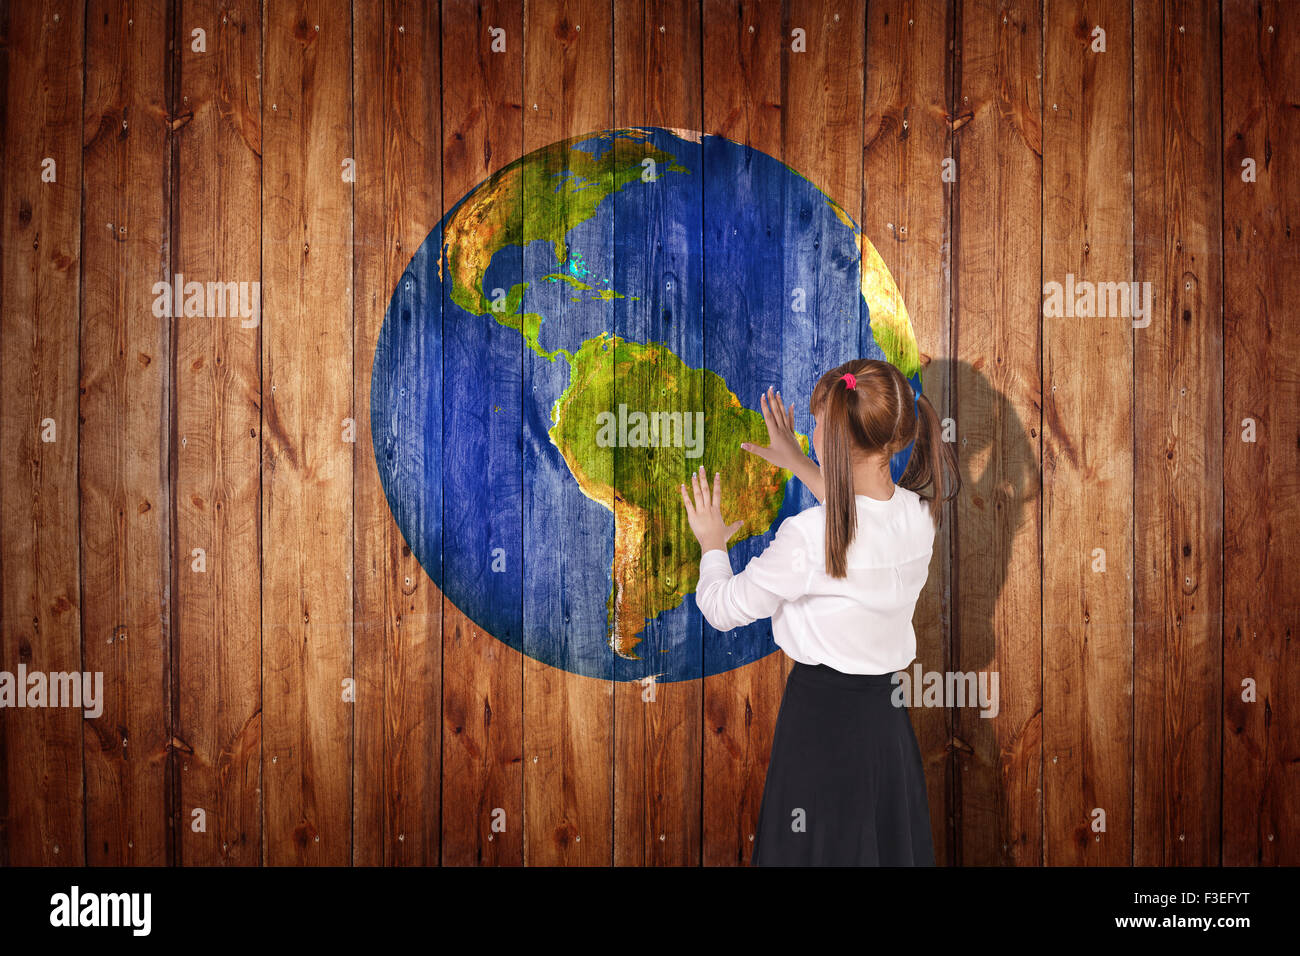 Earth  ball texture on  wood background Stock Photo